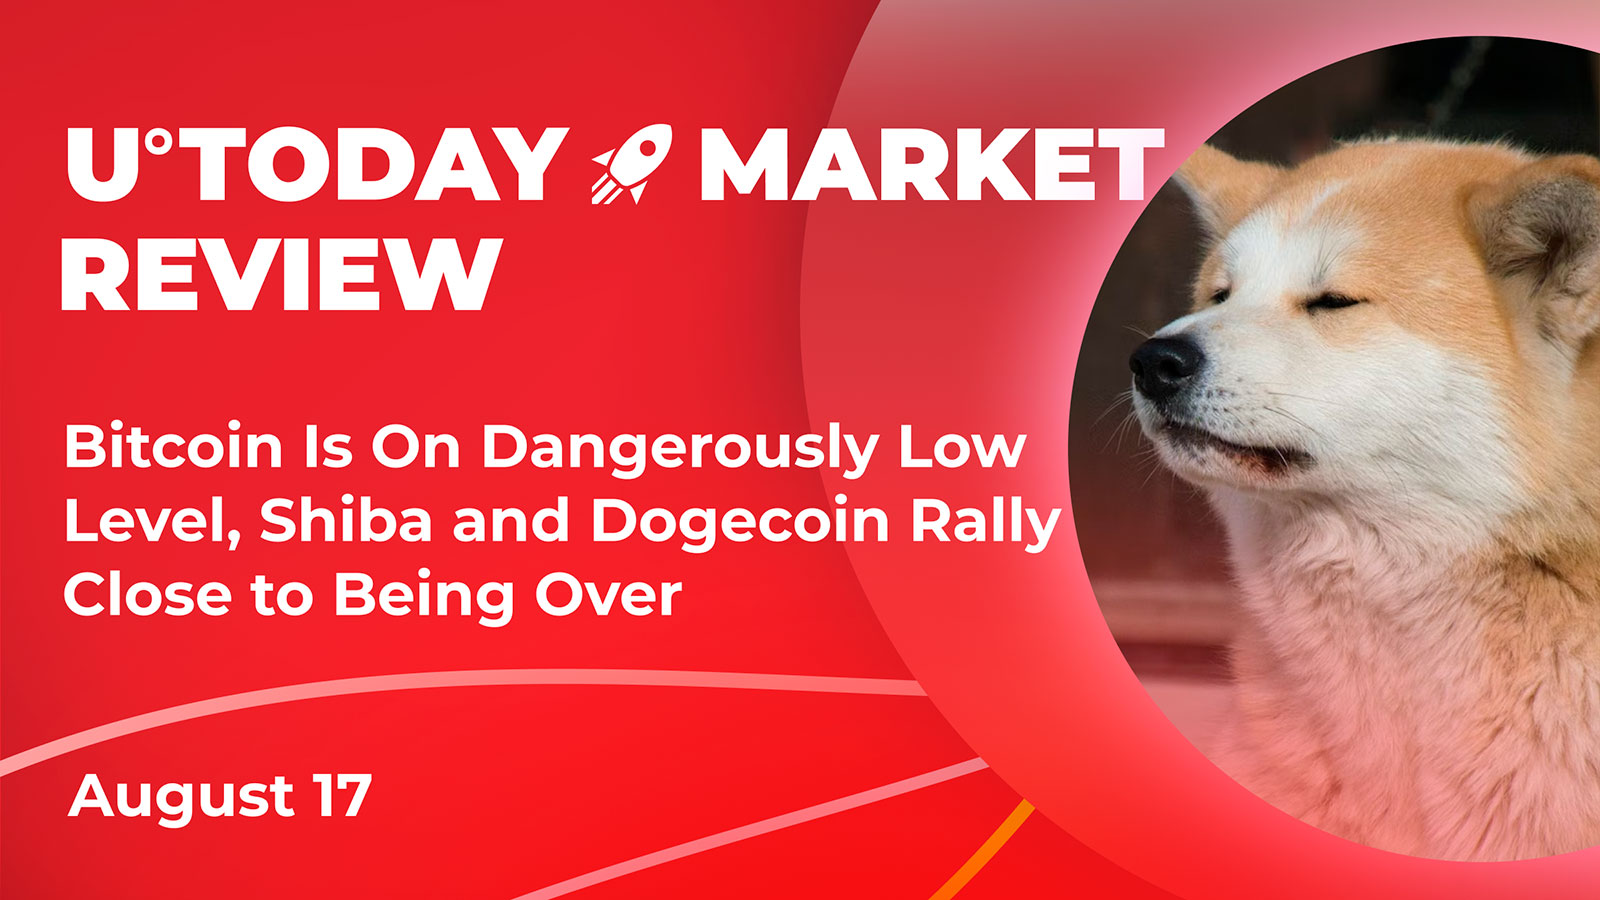 Bitcoin Is On Dangerously Low Level, Shiba and Doge Rally Close to Being Over: Crypto Market Review, August 17